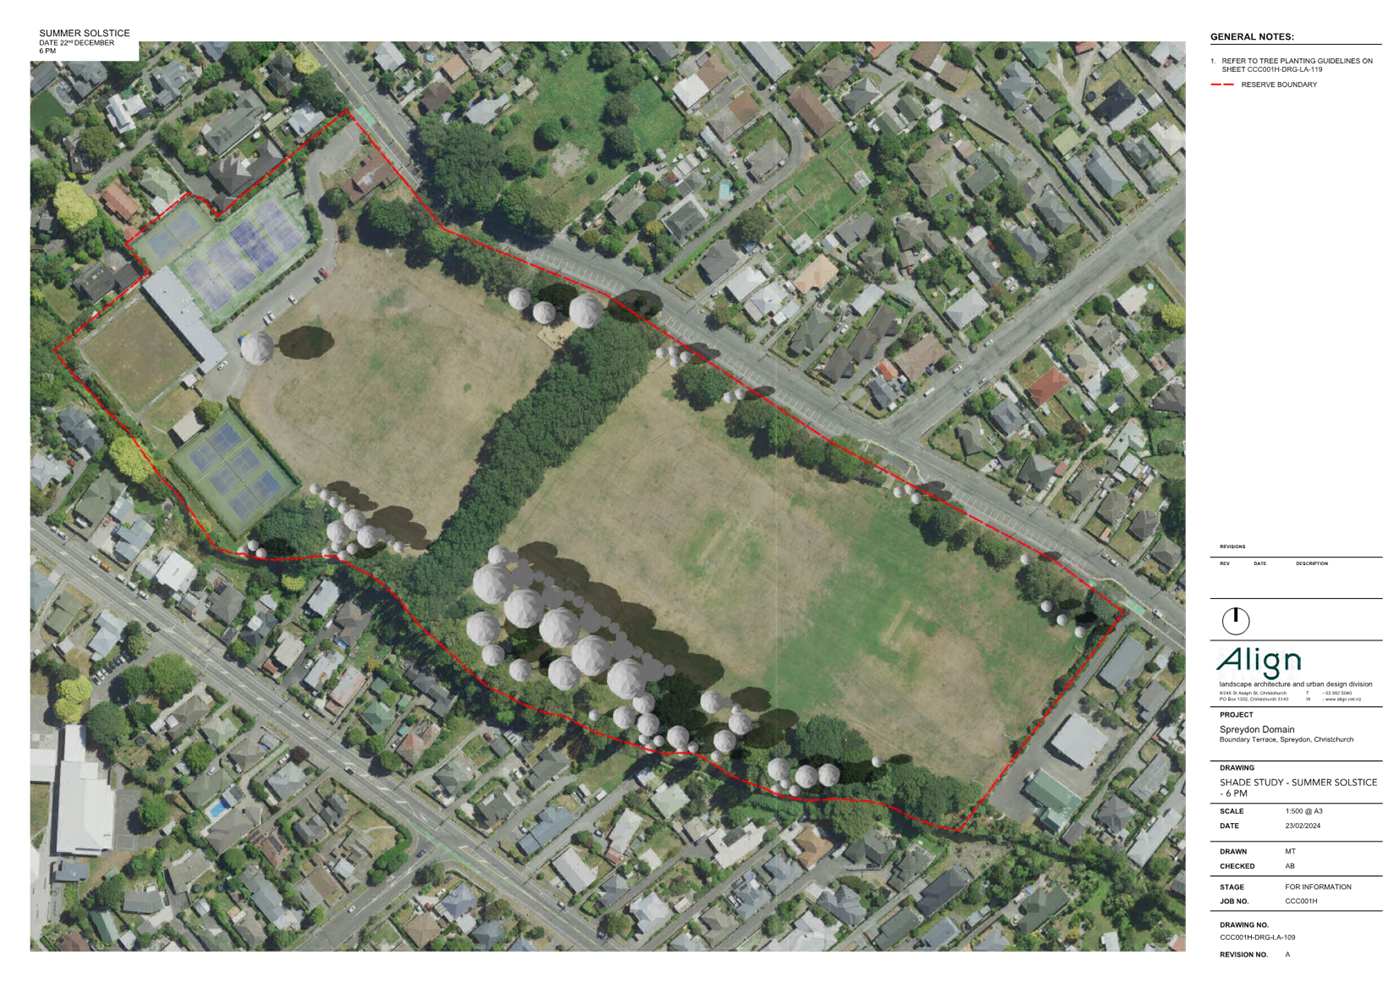 An aerial view of a neighborhood

Description automatically generated